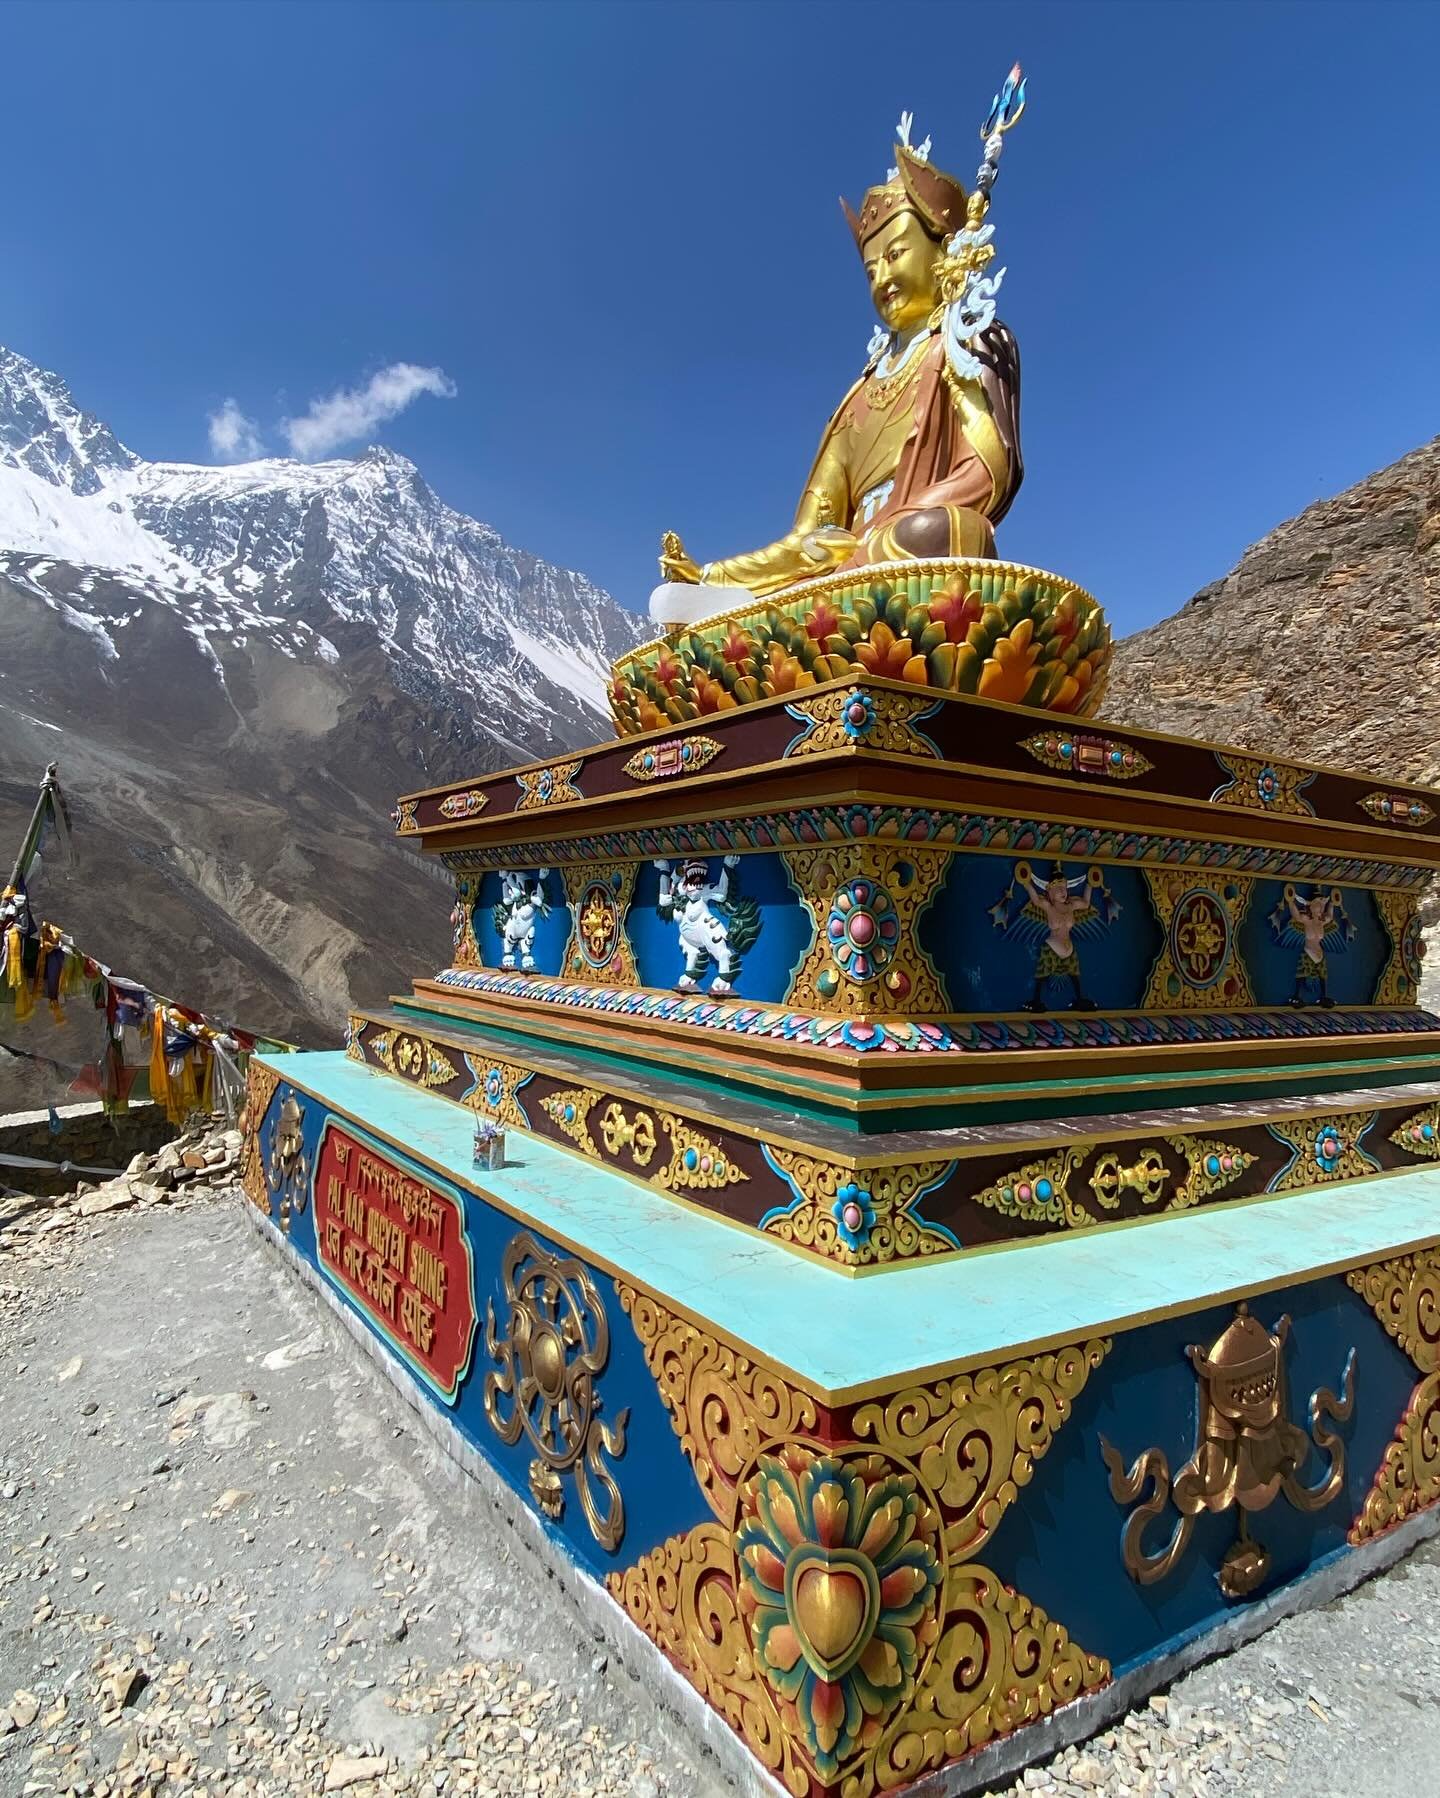 Taking in the blend of exotic, rich, earthy, historic design elements of Northern Nepal.
So colorful and dramatic against the mountain landscape. Old and new, delicate and rugged. 
The energy is real.

#rejuvenating #travel #inspo #historic #metallic